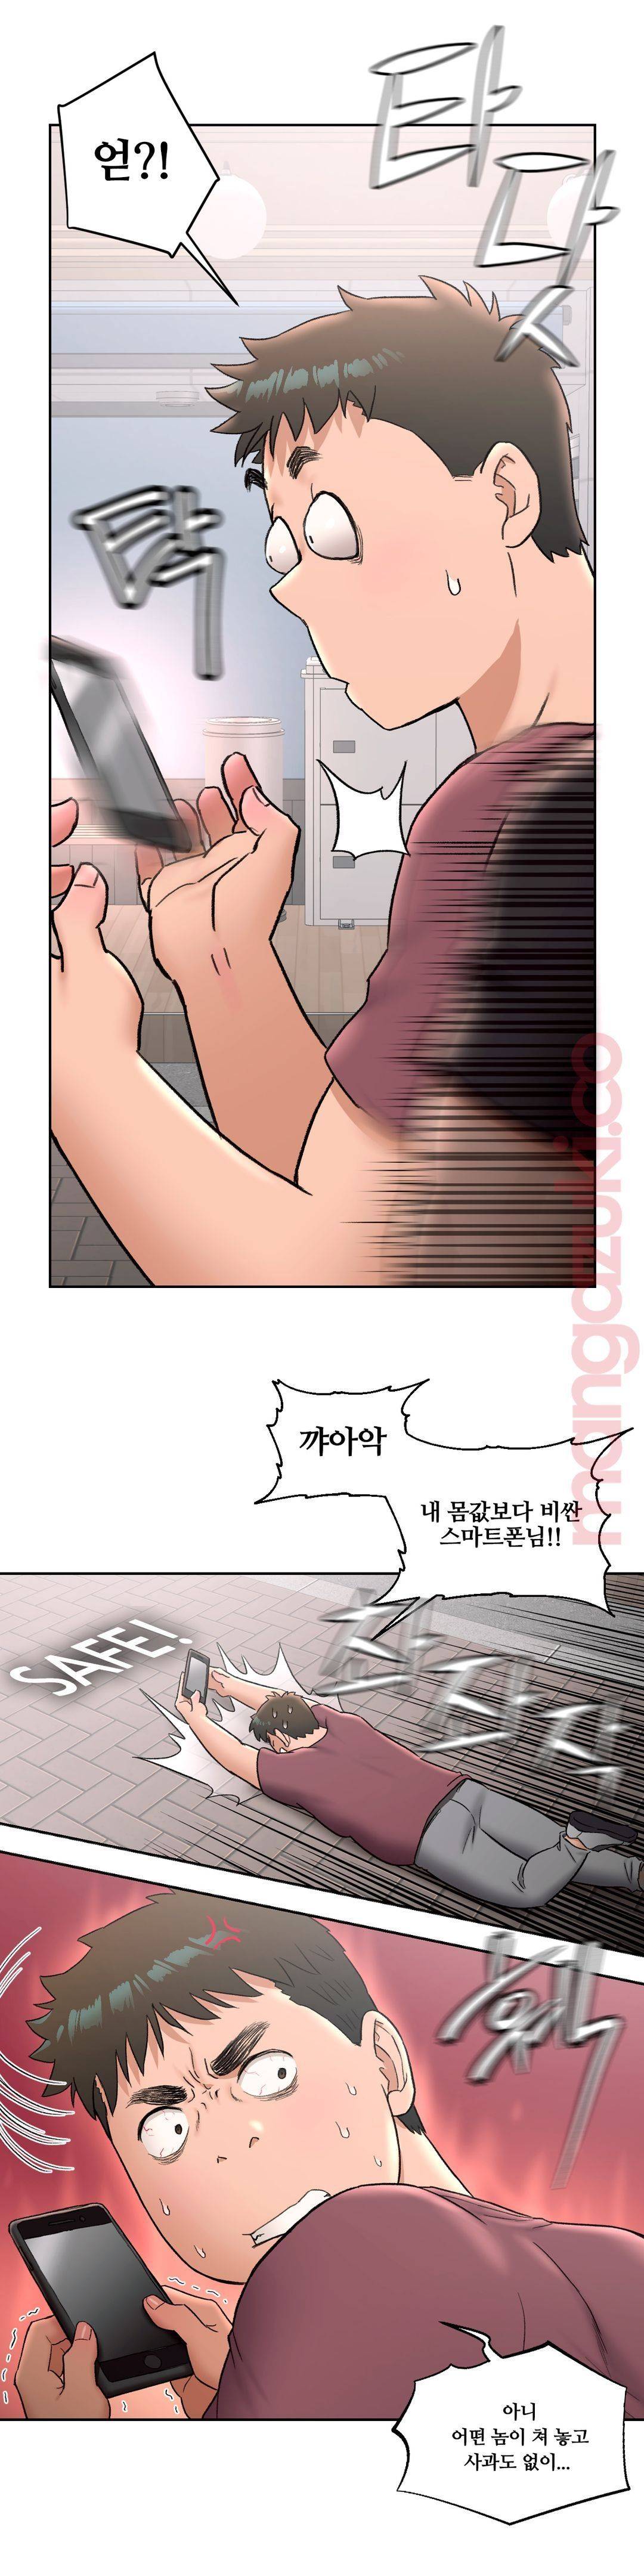 Sexercise Raw - Chapter 41 Page 6